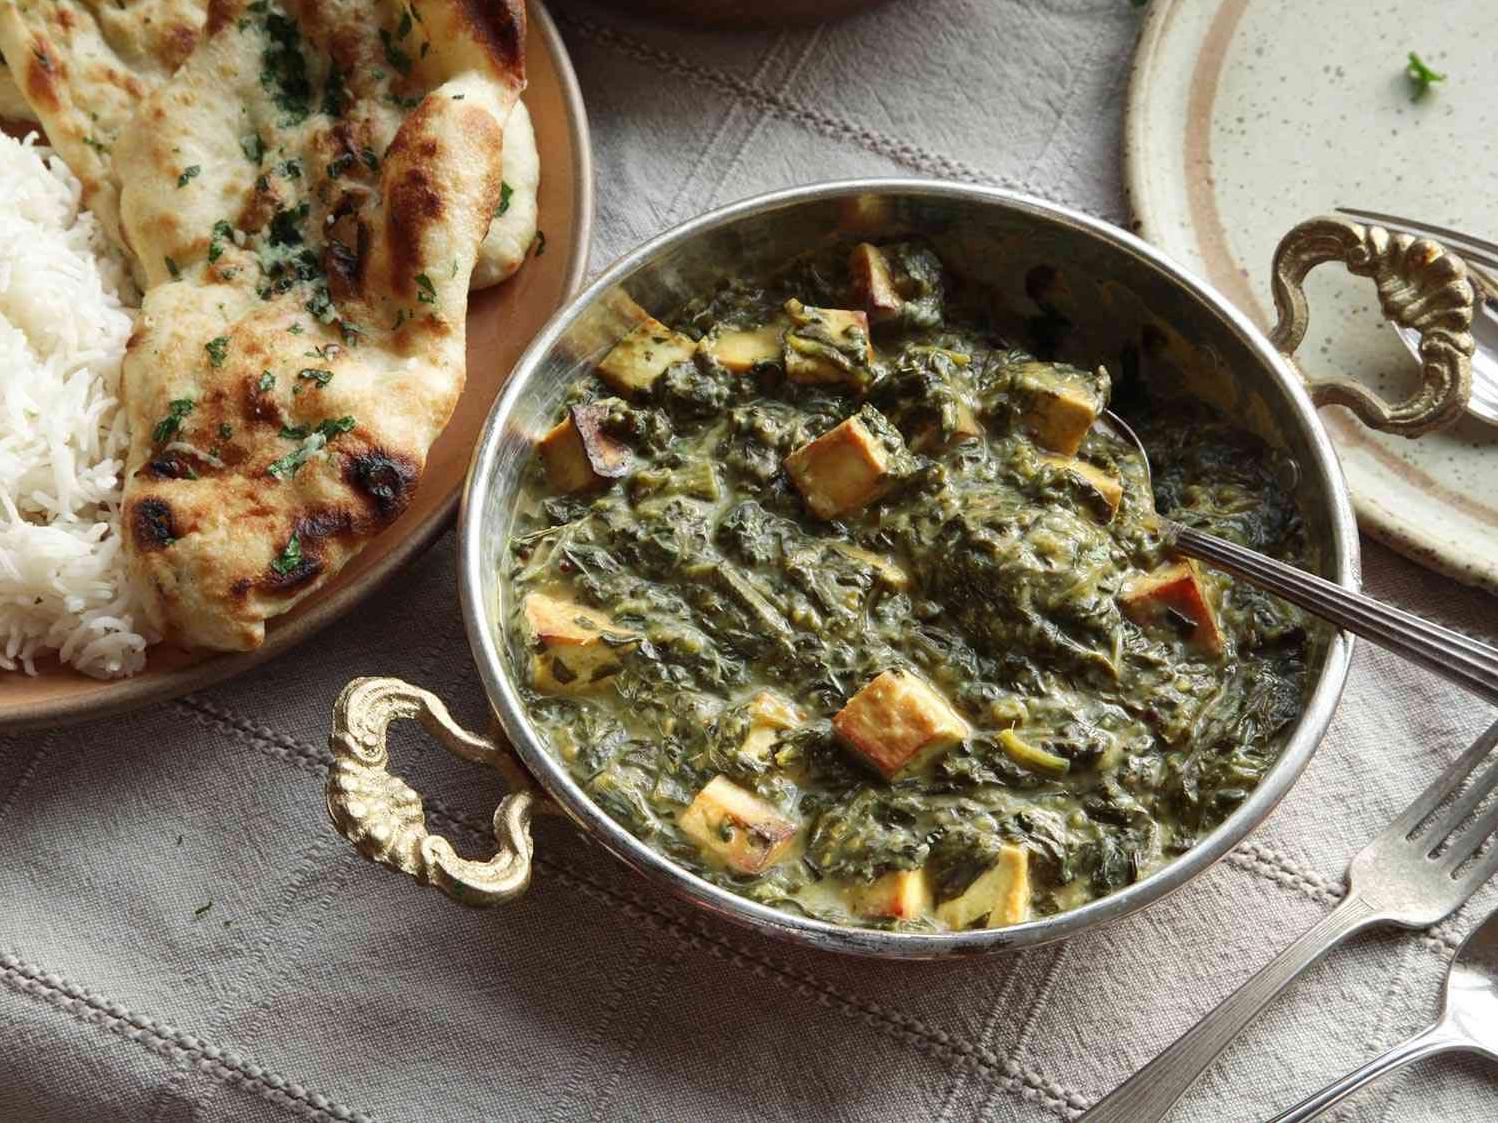 Sure, here are 11 unique photo captions for the Vegan Saag Paneer recipe article: